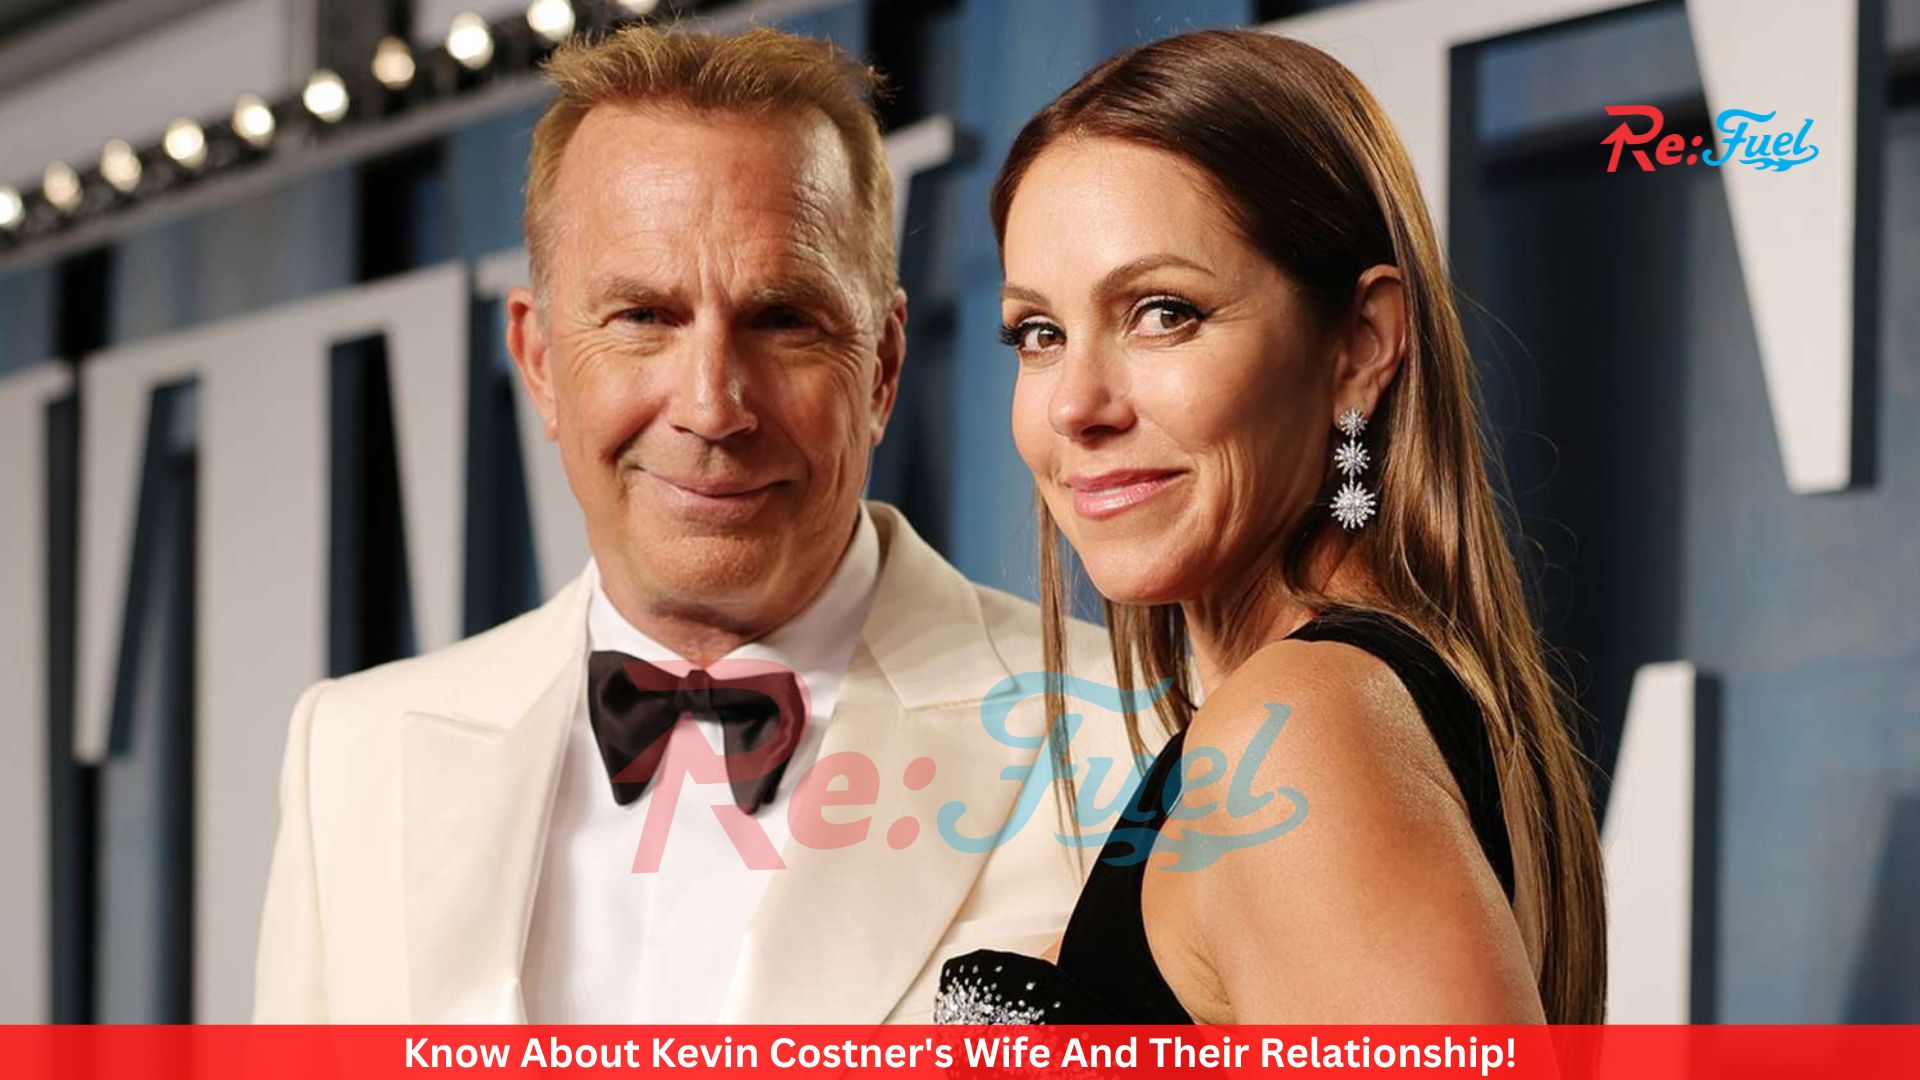 Know About Kevin Costner's Wife And Their Relationship!